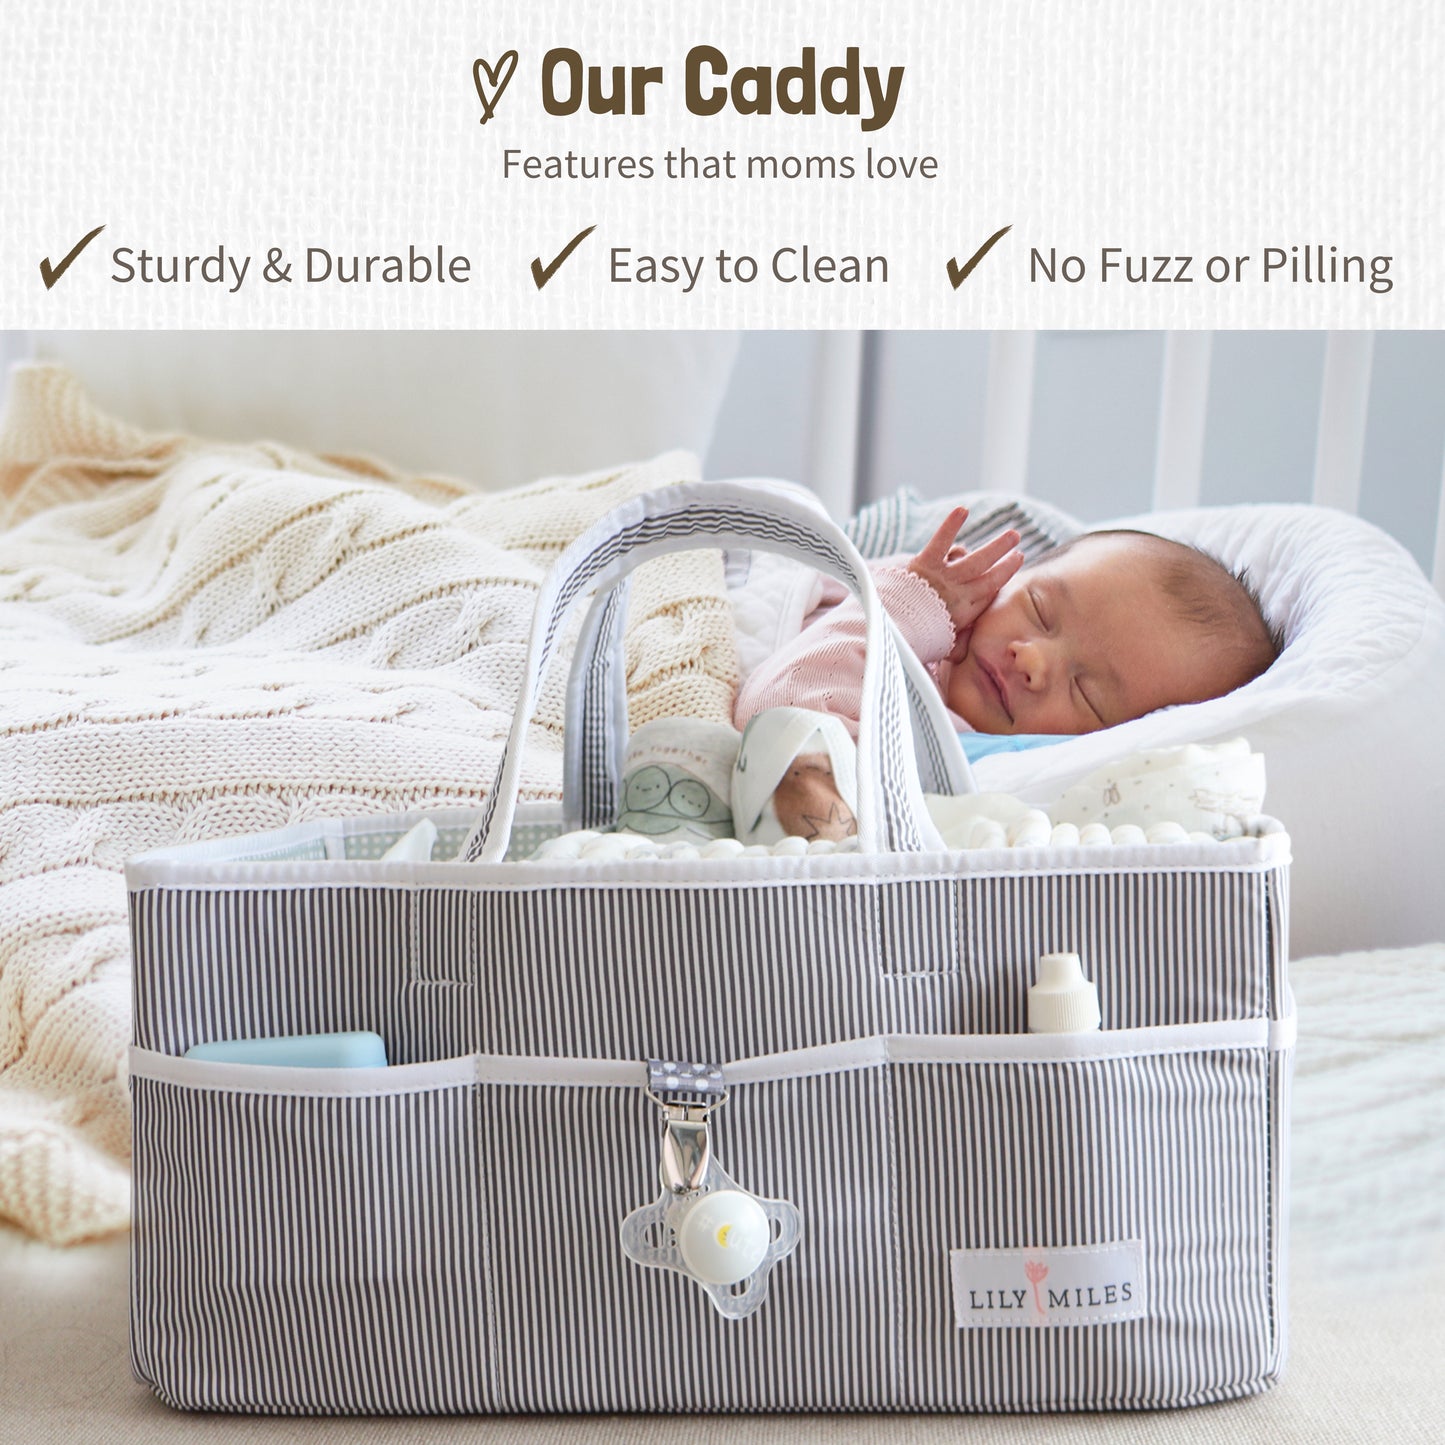 Mint Baby Diaper Caddy